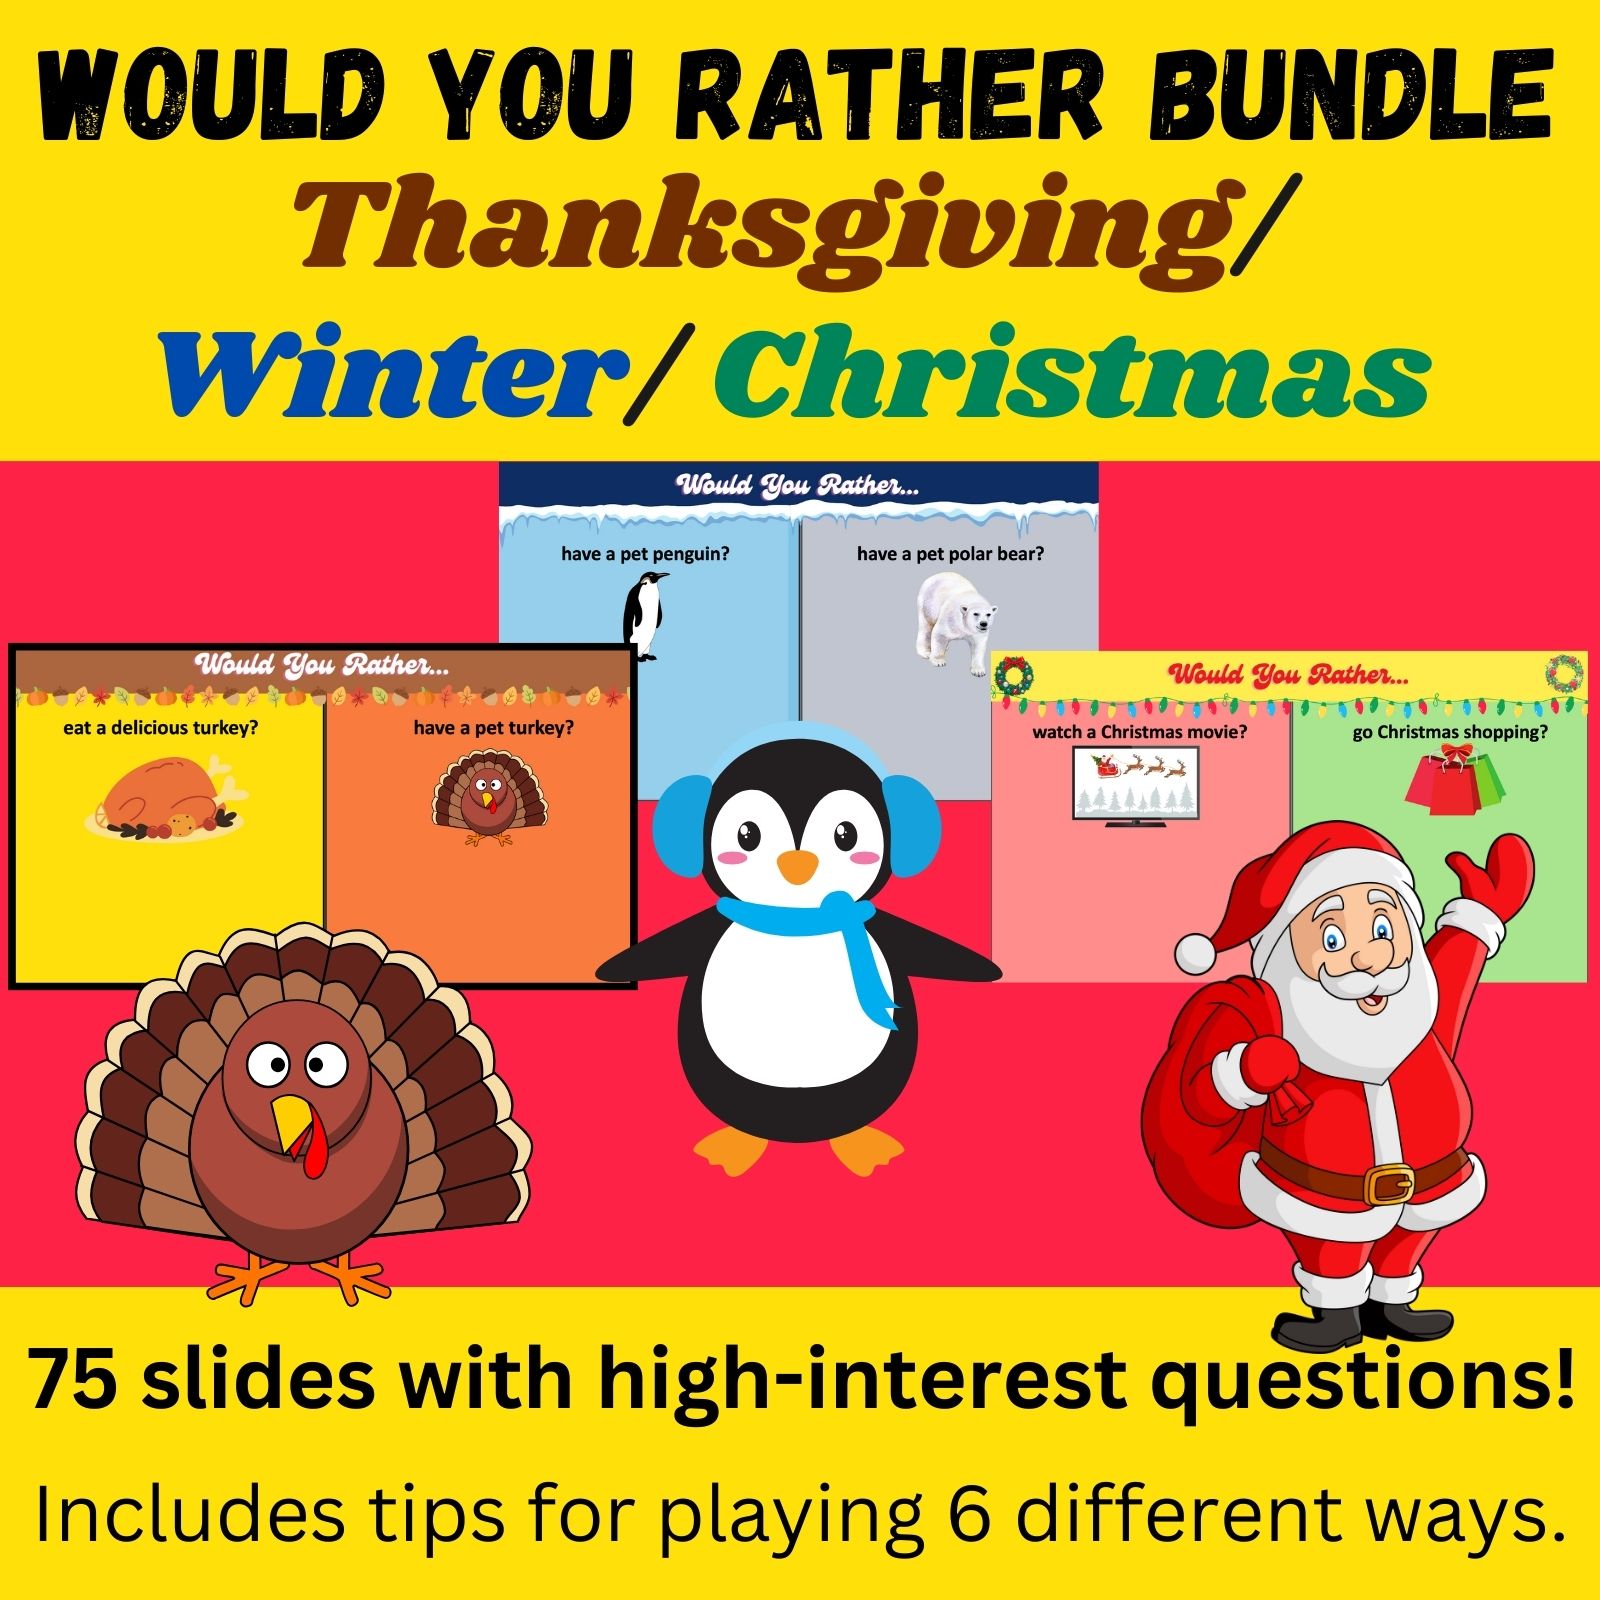 Yellow background with black text that says "Would You Rather Bundle: Thanksgiving/Chrristmas/Winter edition" In the middle are clipart of a turkey, a penguin, and Santa Claus.